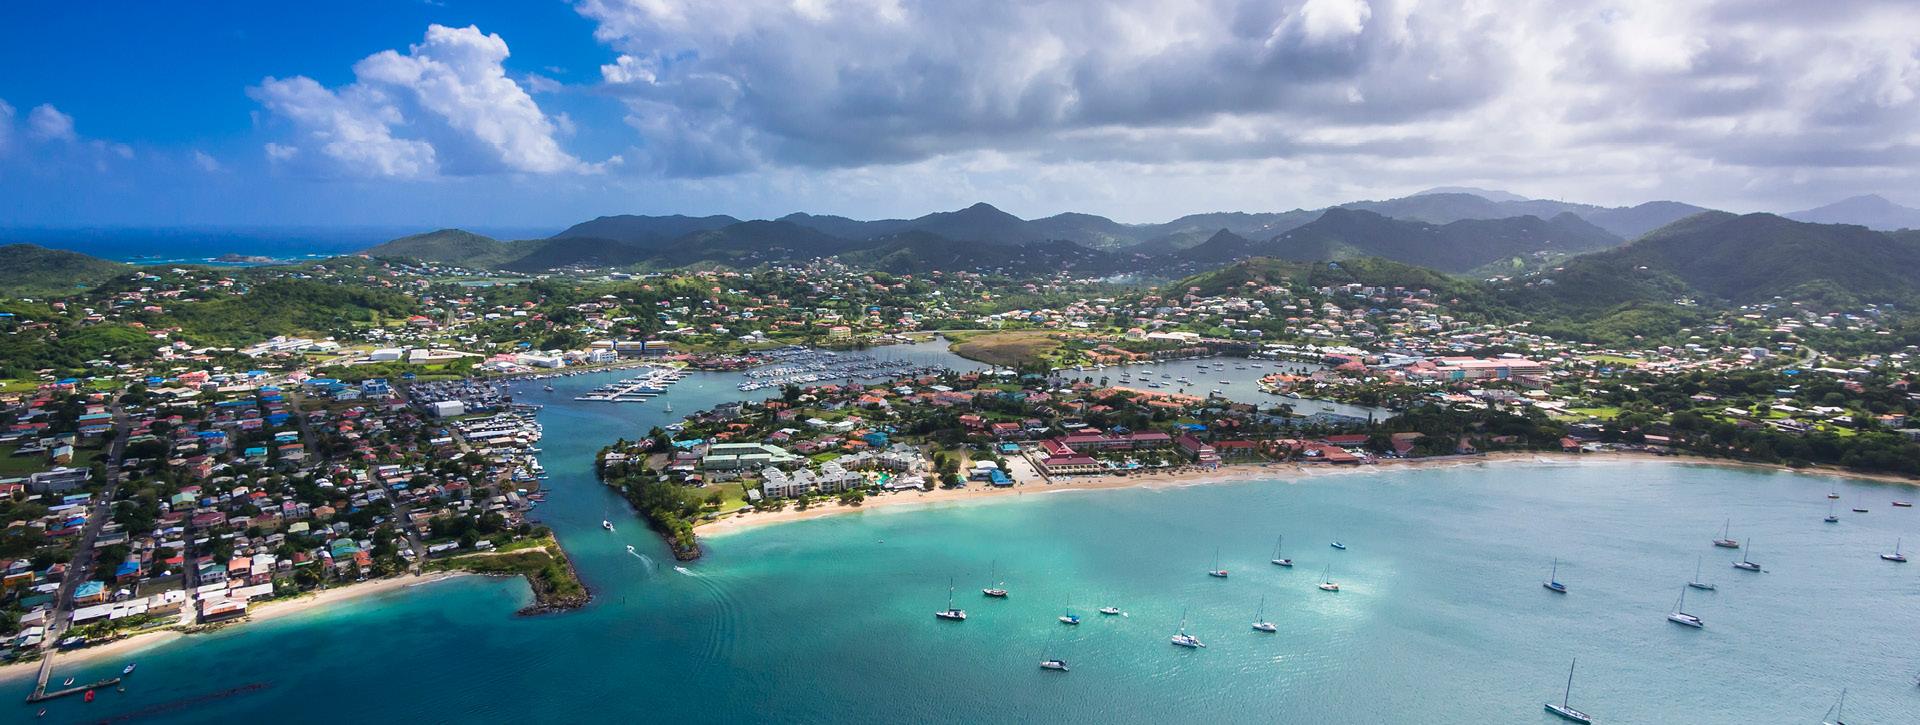 Beautiful view of St. Lucia, a Southern Caribbean island